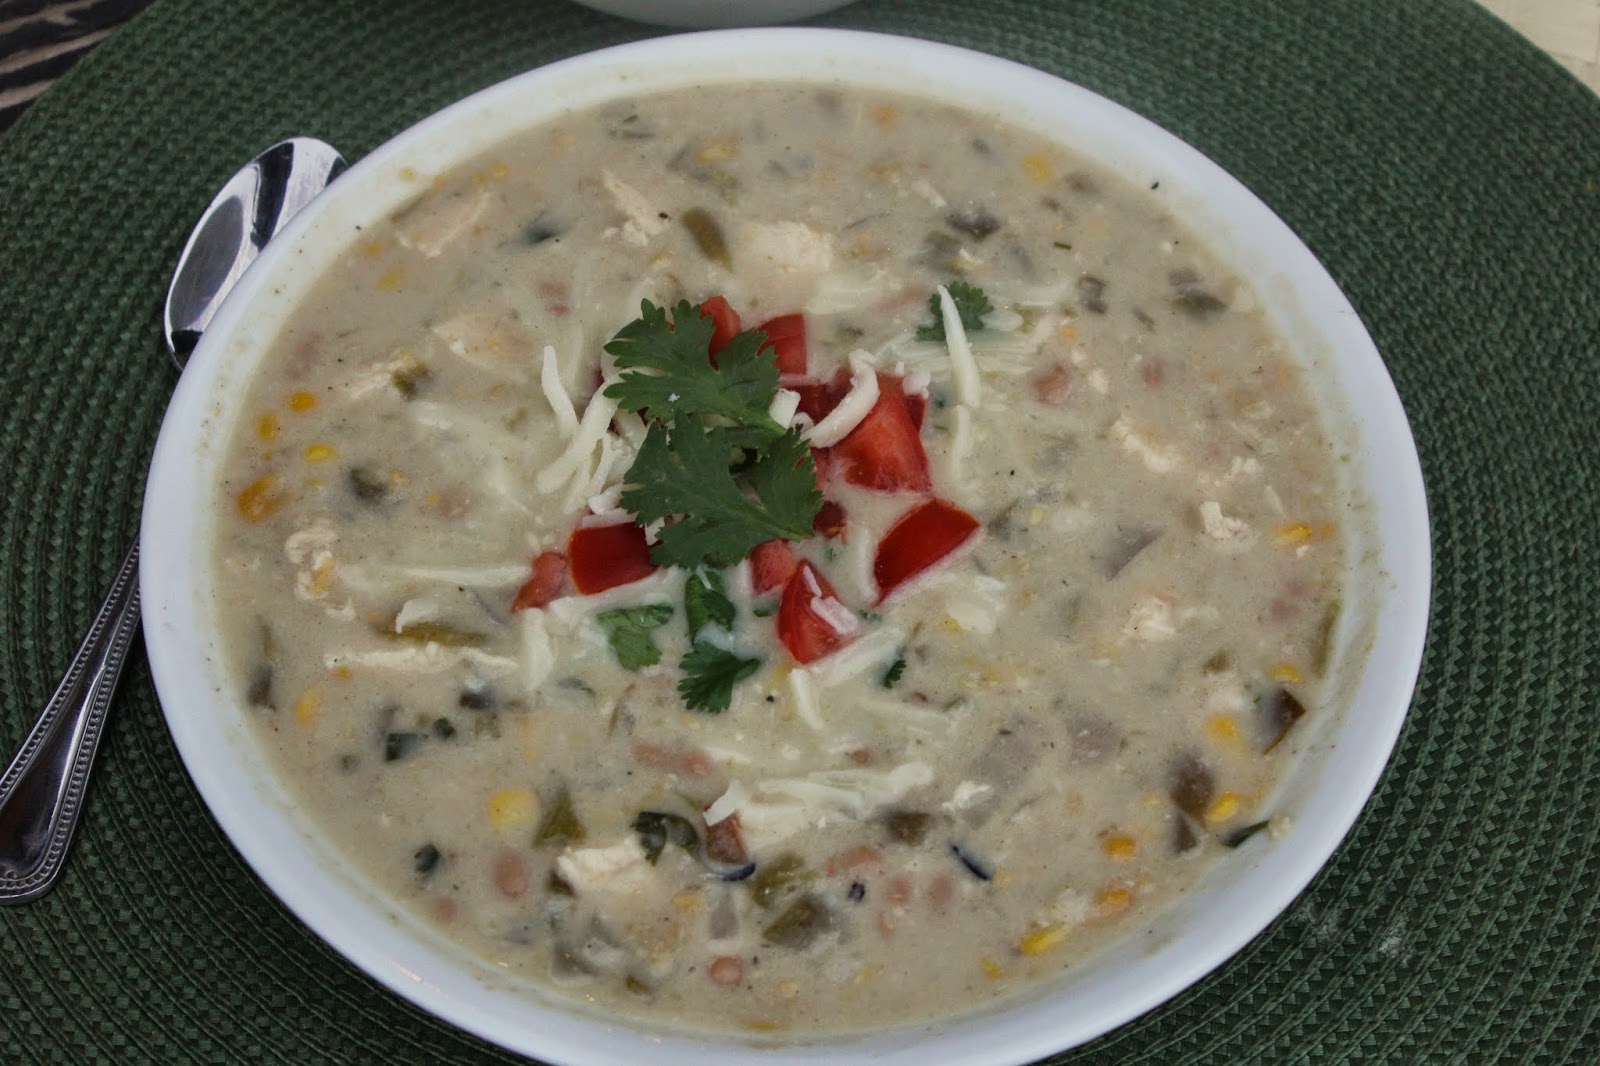 Mexican Chicken and Corn Chowder, Recipe: Soup, Recipe: Food Storage, Recipe: Chicken, Recipe: Healthy, favorite soup, green chili and white bean soup, Deals to Meals